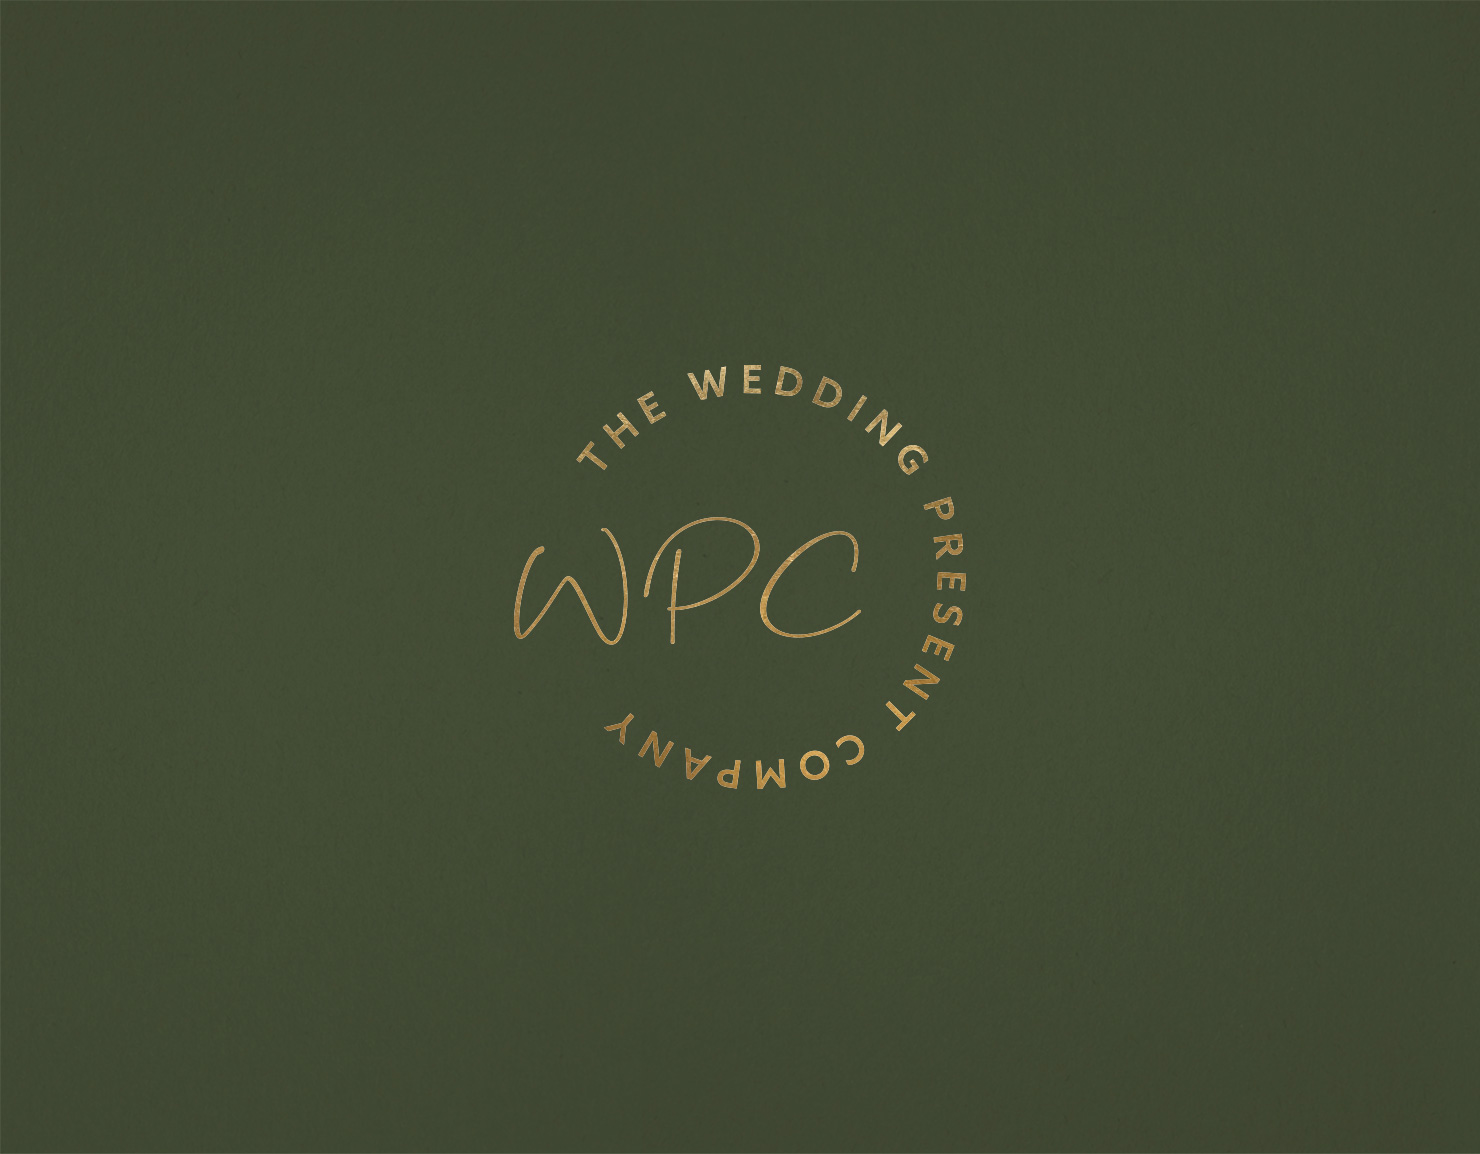 The Wedding Present Company - An upscaled evolution